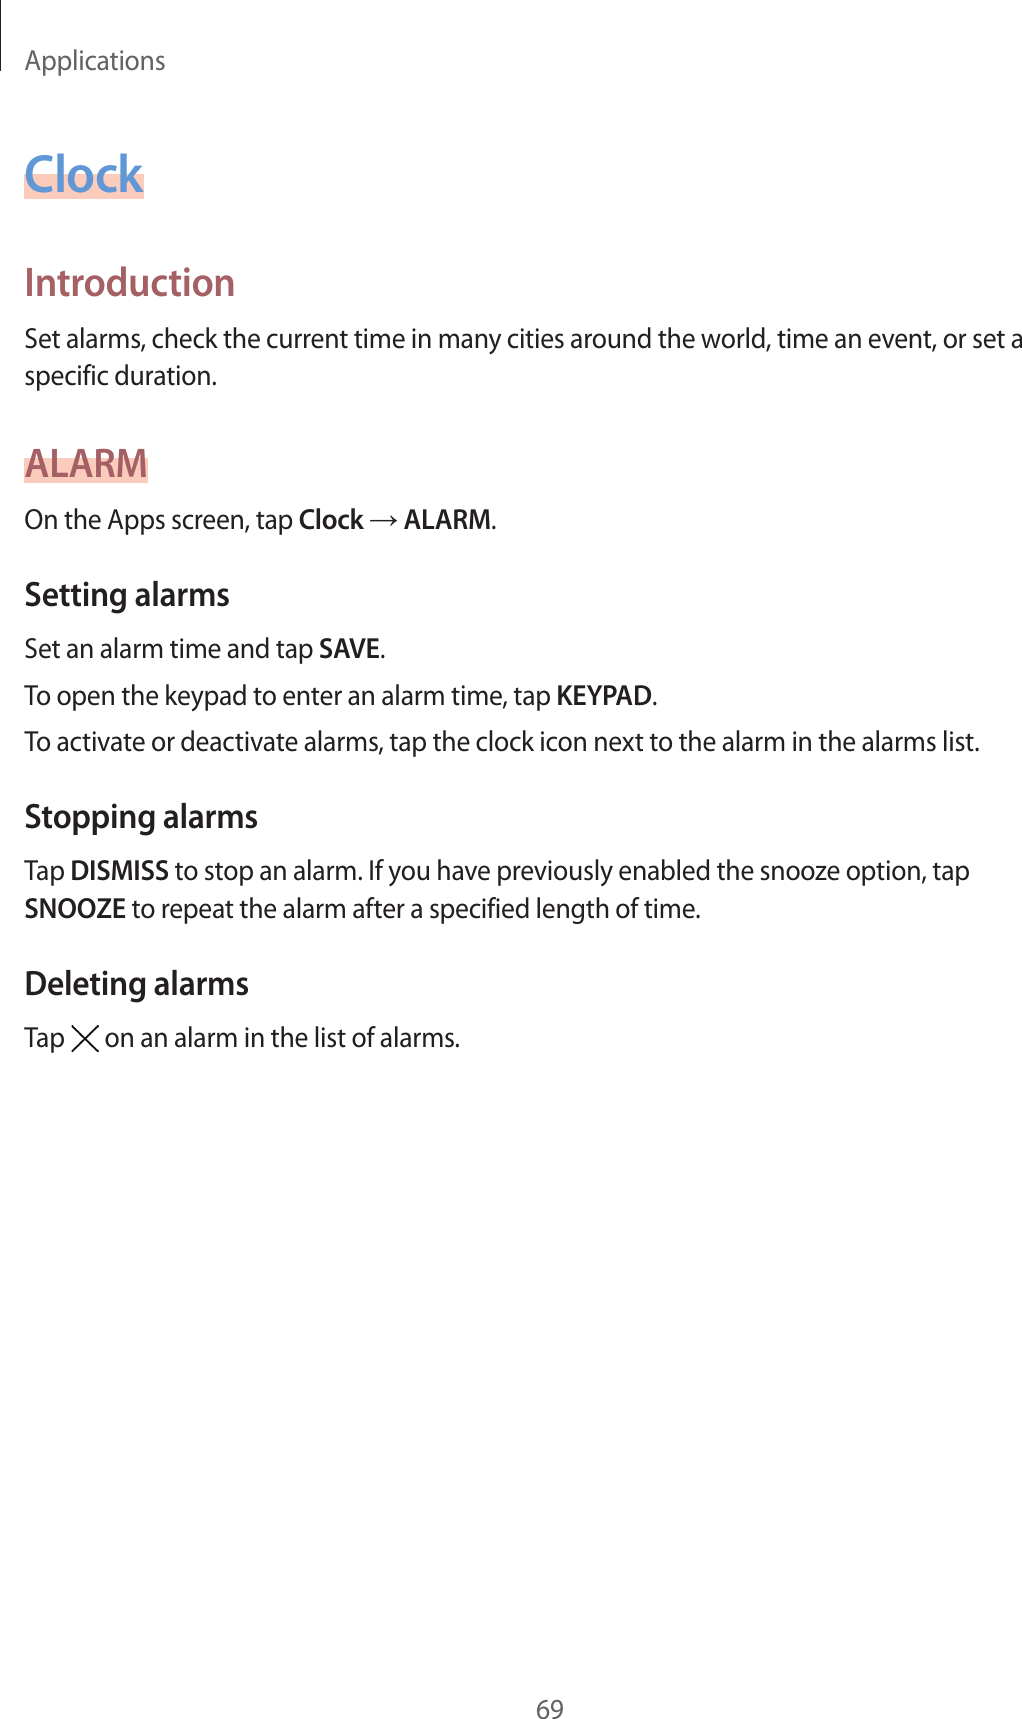 Applications69ClockIntroductionSet alarms, check the current time in many cities around the world, time an event, or set a specific duration.ALARMOn the Apps screen, tap Clock → ALARM.Setting alarmsSet an alarm time and tap SAVE.To open the keypad to enter an alarm time, tap KEYPAD.To activate or deactivate alarms, tap the clock icon next to the alarm in the alarms list.Stopping alarmsTap DISMISS to stop an alarm. If you have previously enabled the snooze option, tap SNOOZE to repeat the alarm after a specified length of time.Deleting alarmsTap   on an alarm in the list of alarms.